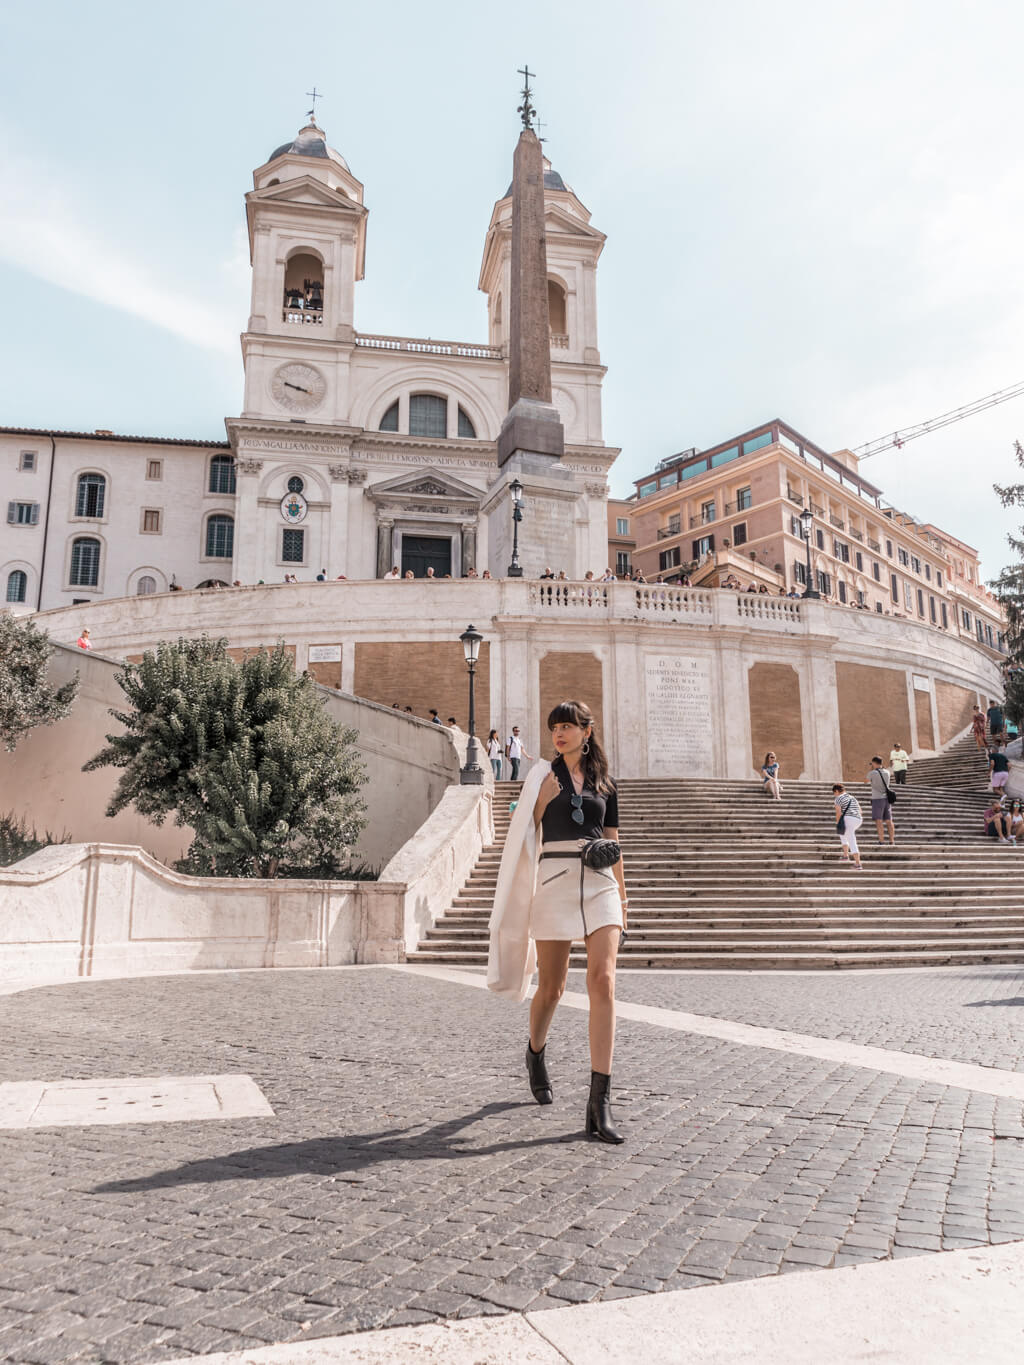 A Guide For Planning A Trip To Rome - Things to do in romantic Rome {3 day itinerary, including food & restaurants tips, shopping and sightseeing}